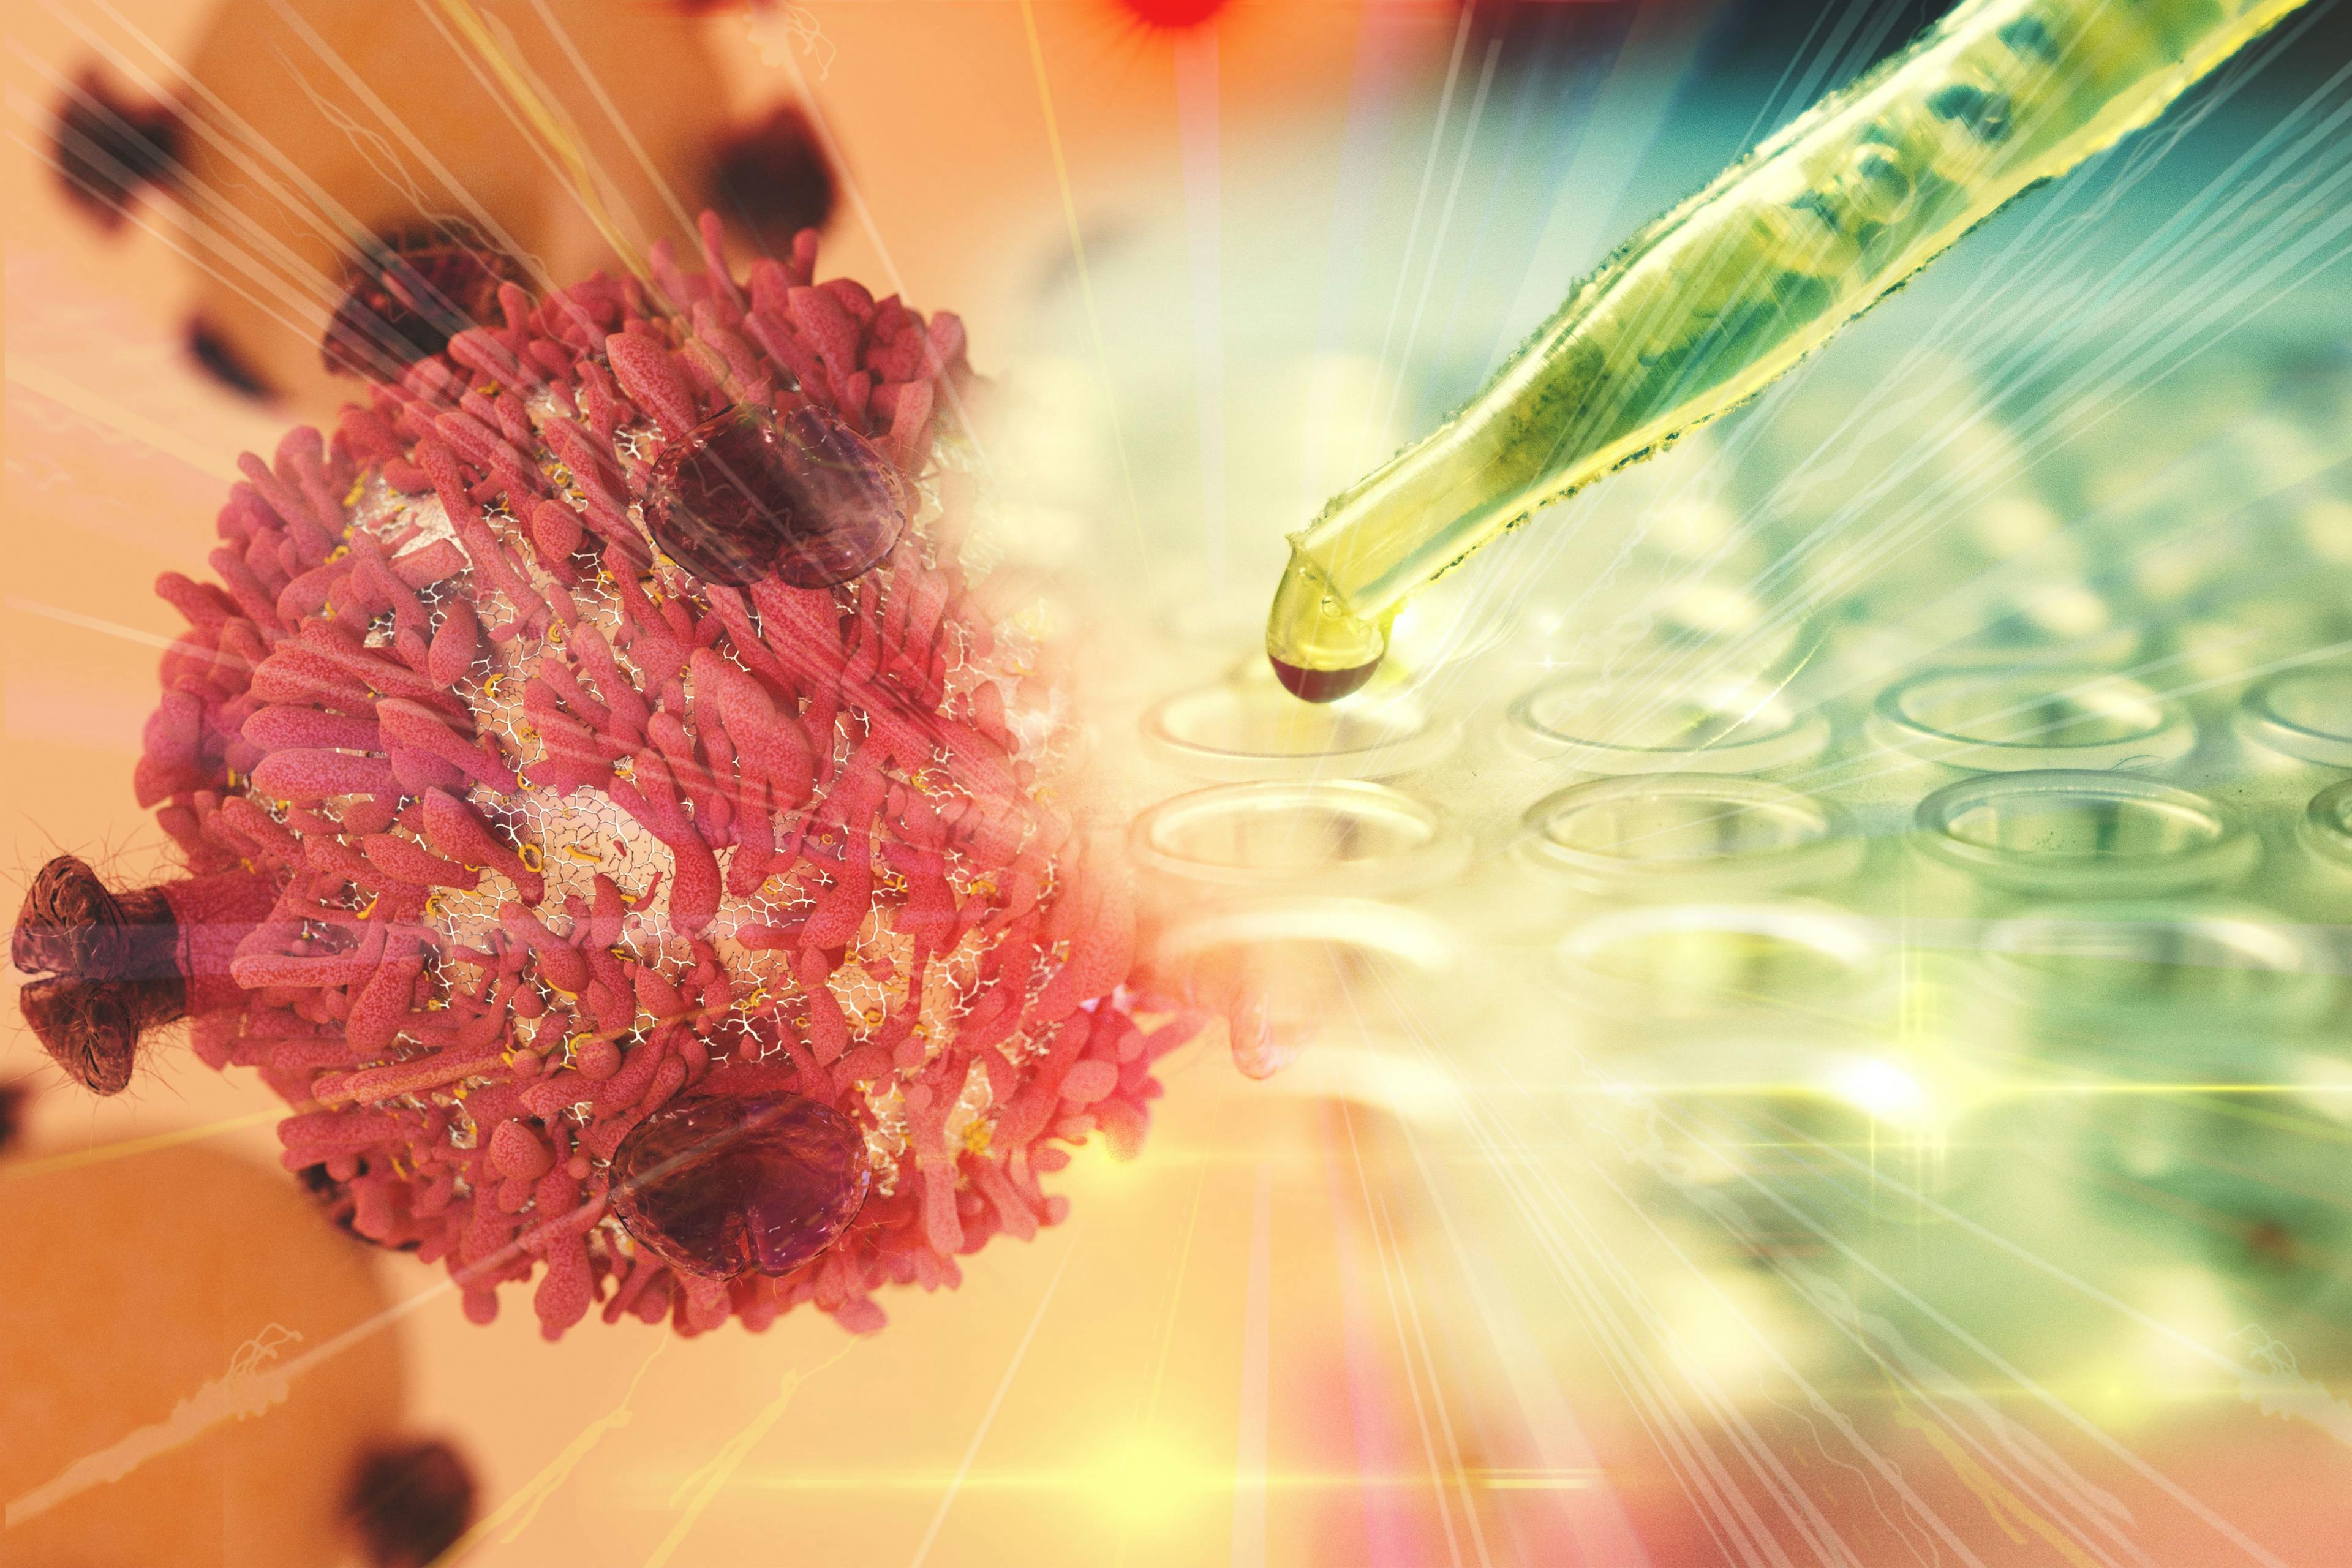 NCCN Releases CAR-T Cell Guidelines for Patients with Cancer